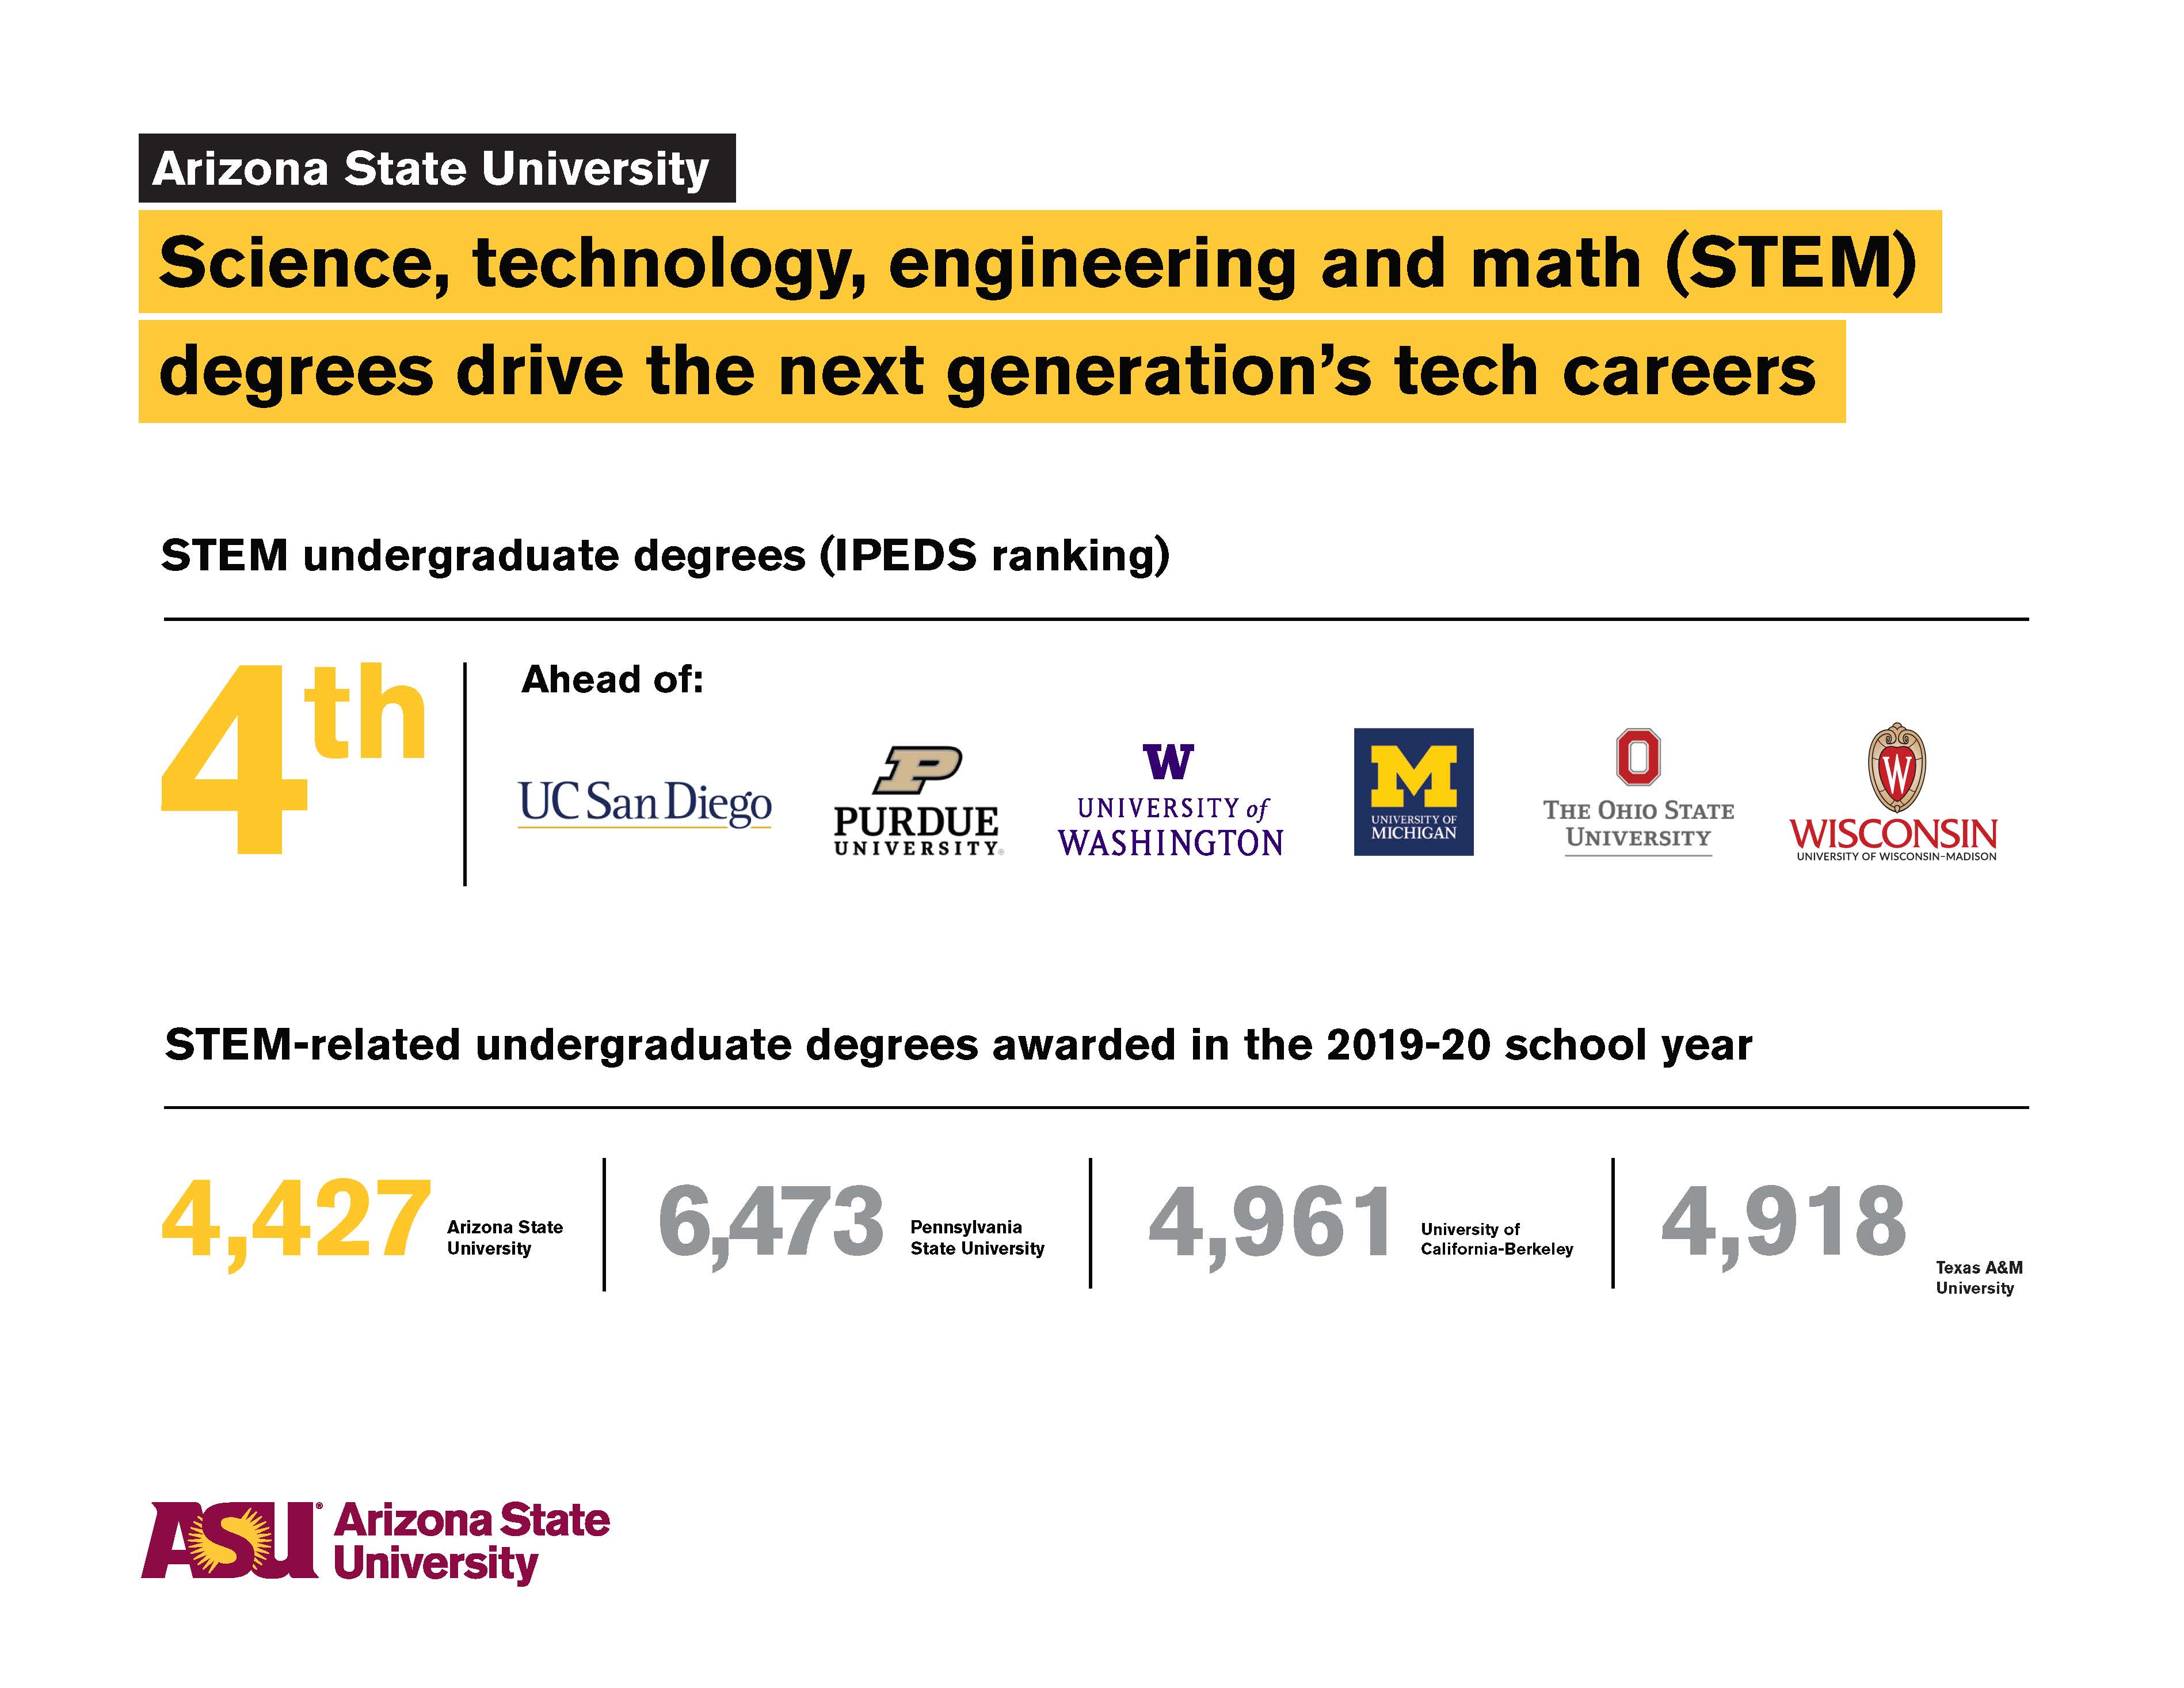 graphic that shows how ASU compares in STEM degrees to other universities